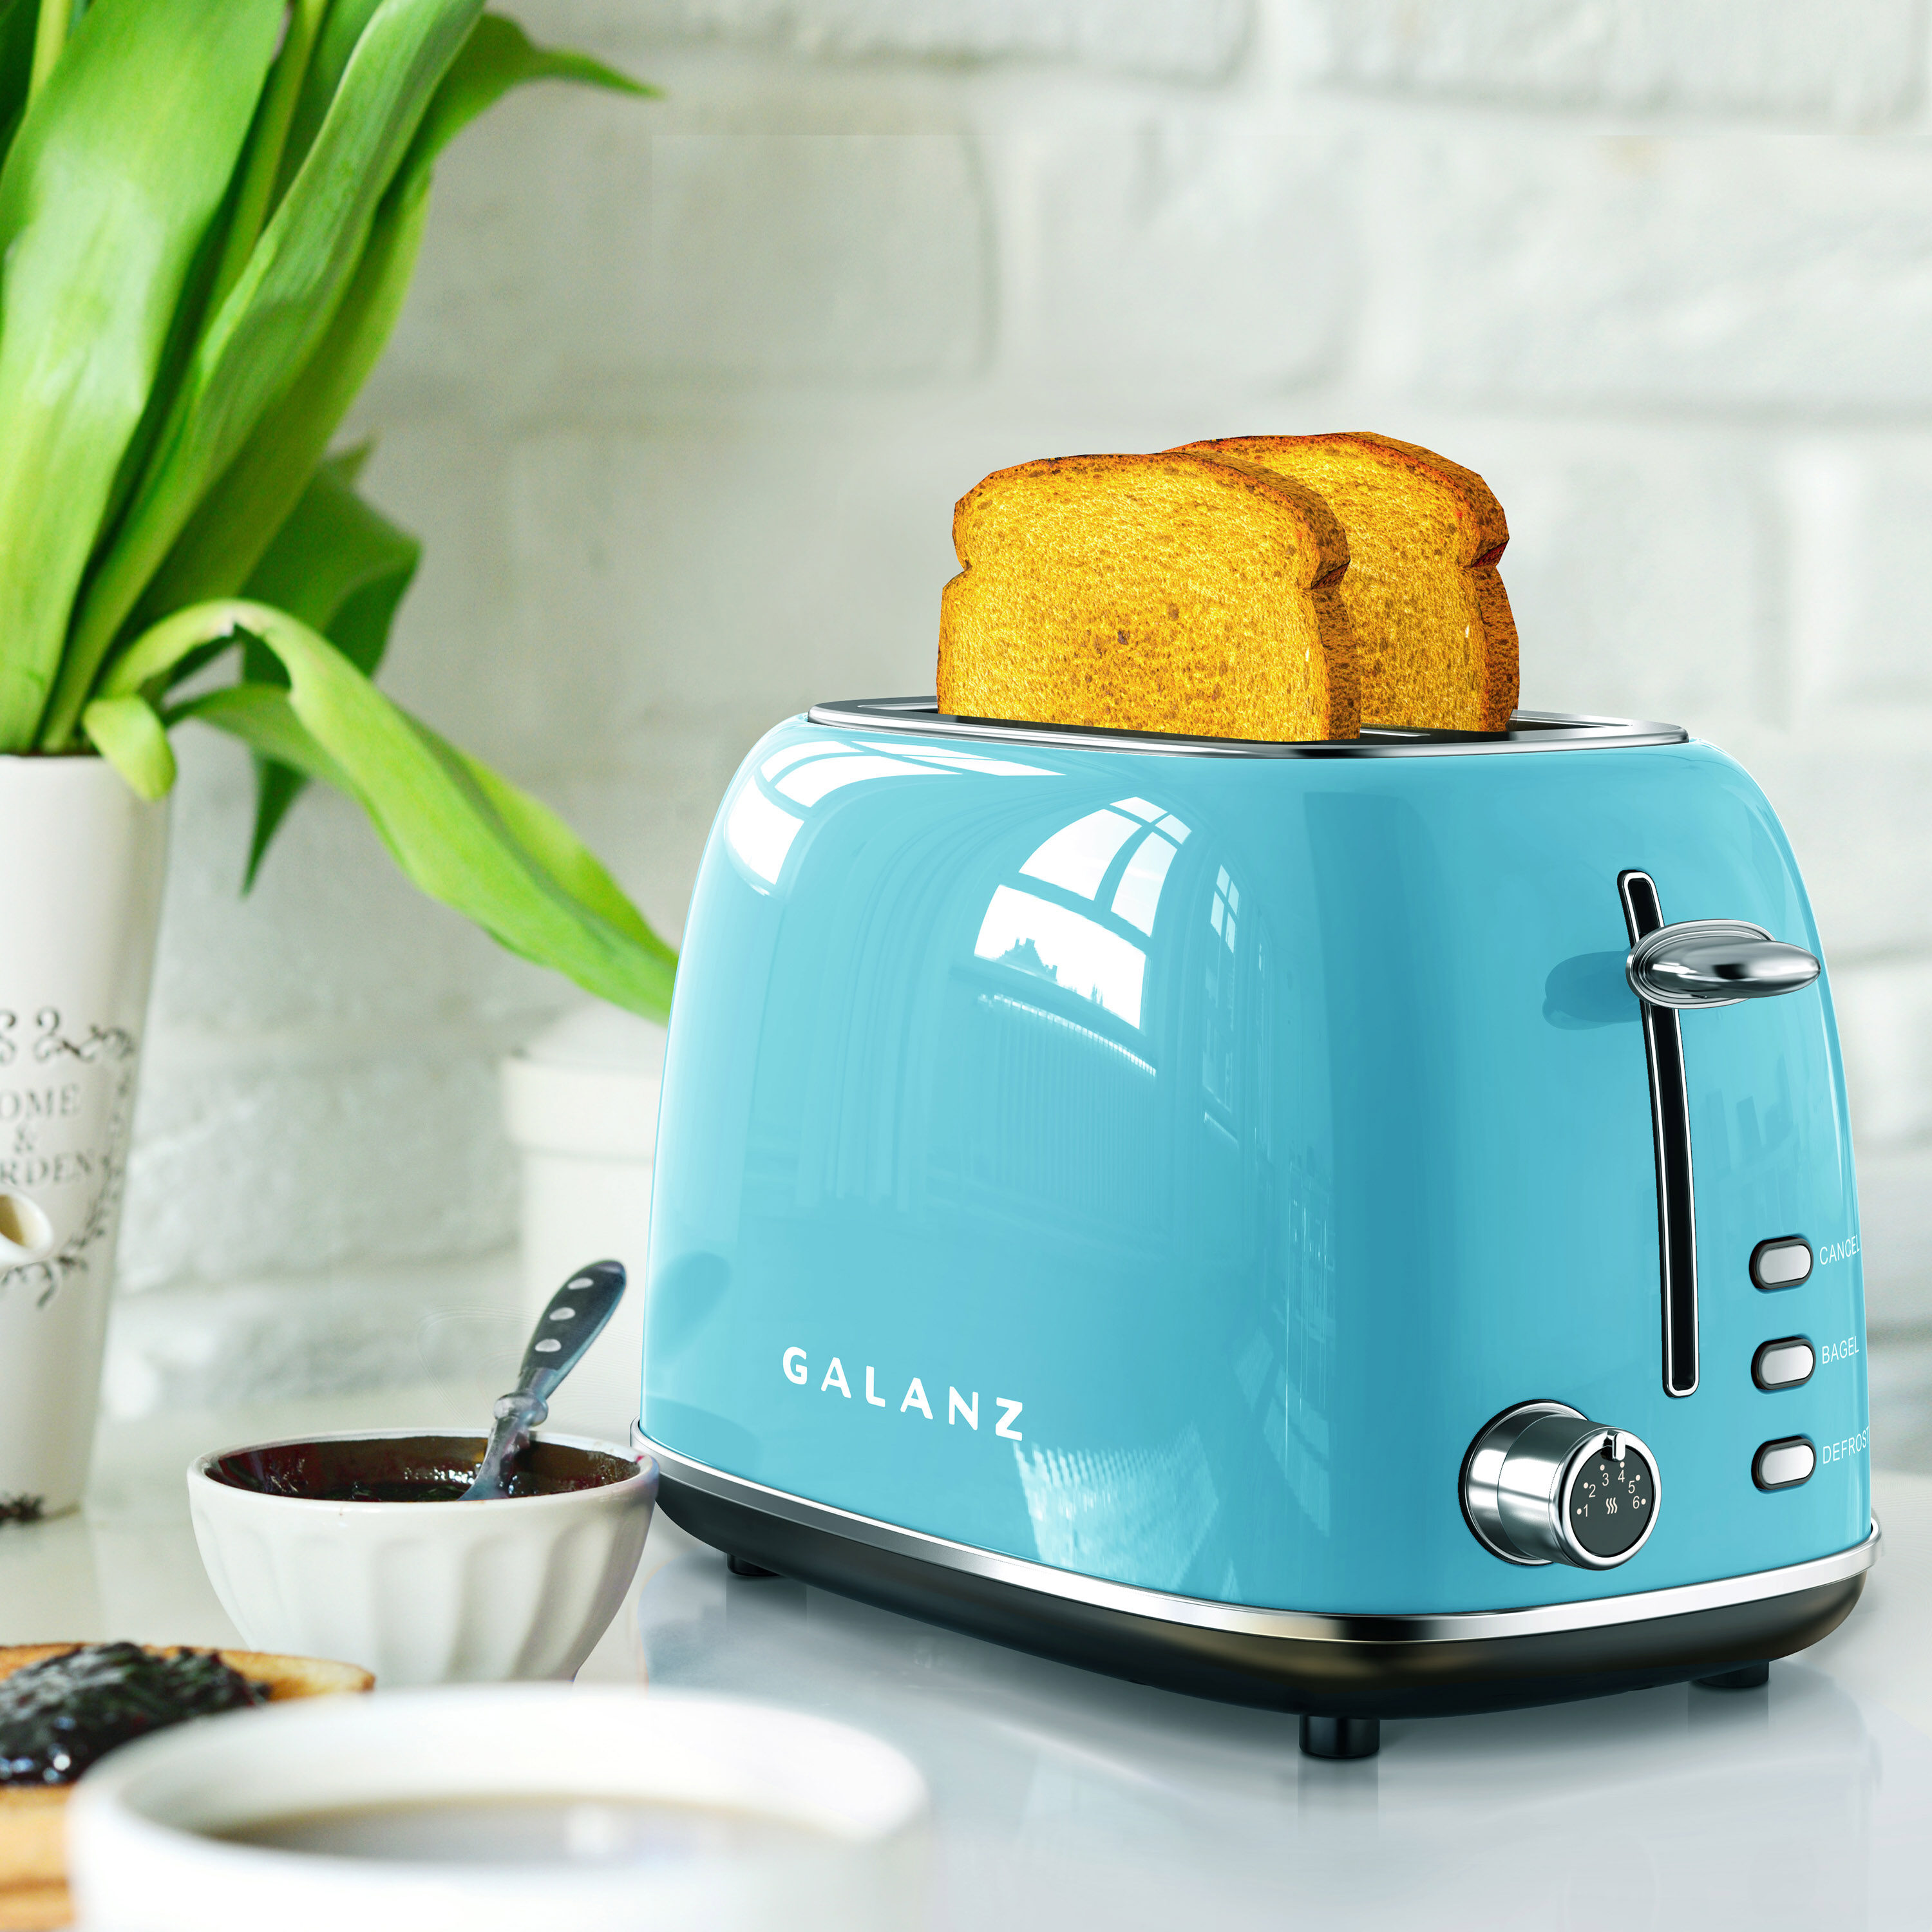 Galanz Blue Retro 2-Slice Toaster, ETL Safety Listed, 6 Browning Options, Slide-Out Crumb Tray, Timer, 825W